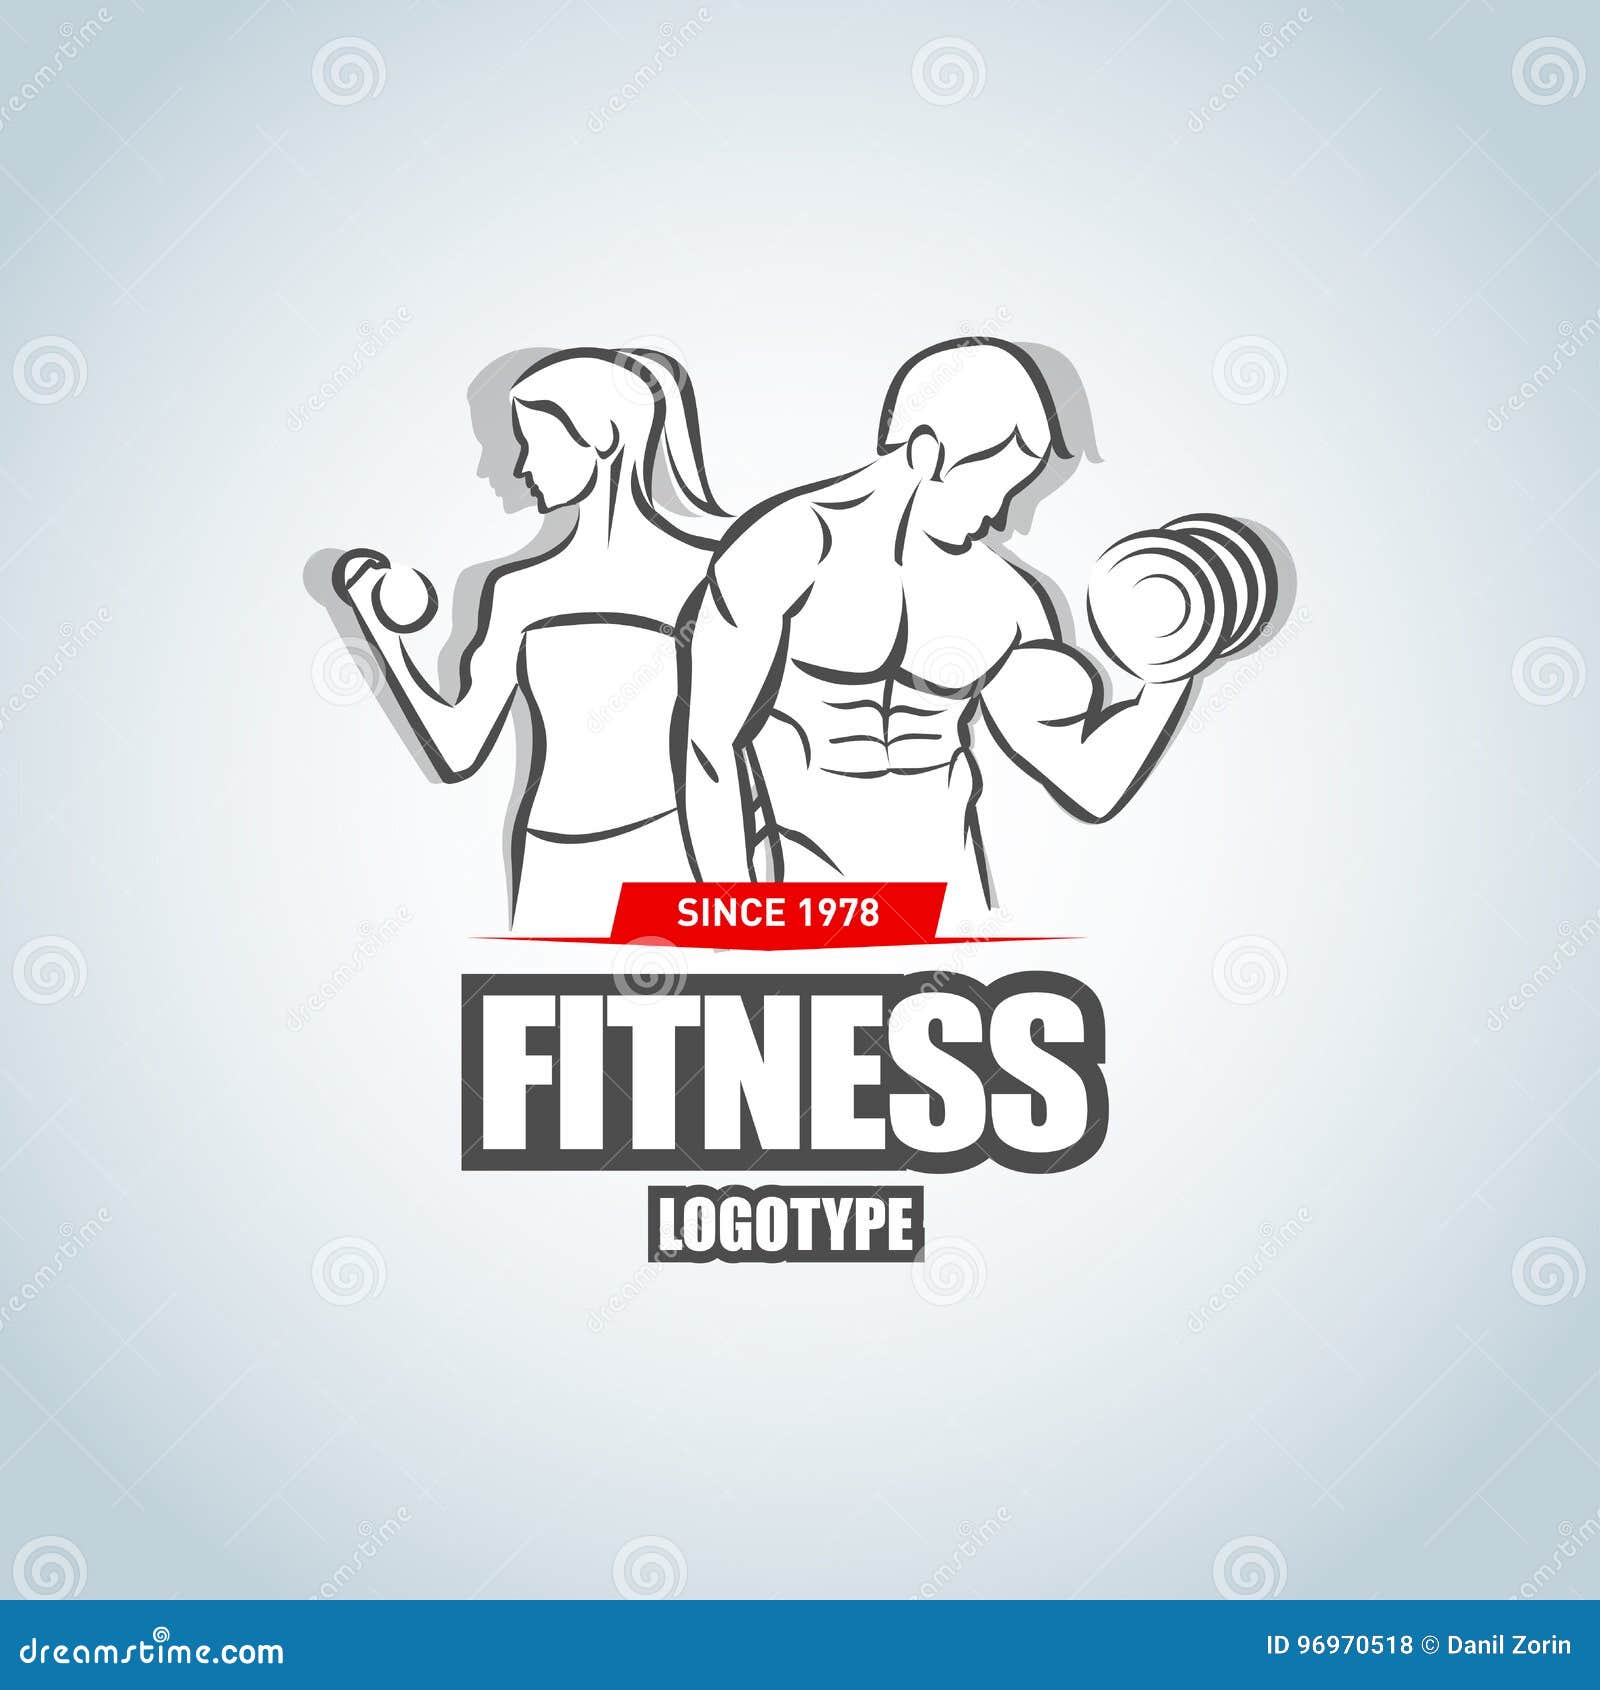 Man And Woman Fitness Logo Template Gym Club Logotype Sport Fitness Club Creative Concept Vector Format Stock Vector Illustration Of Chain Emblem